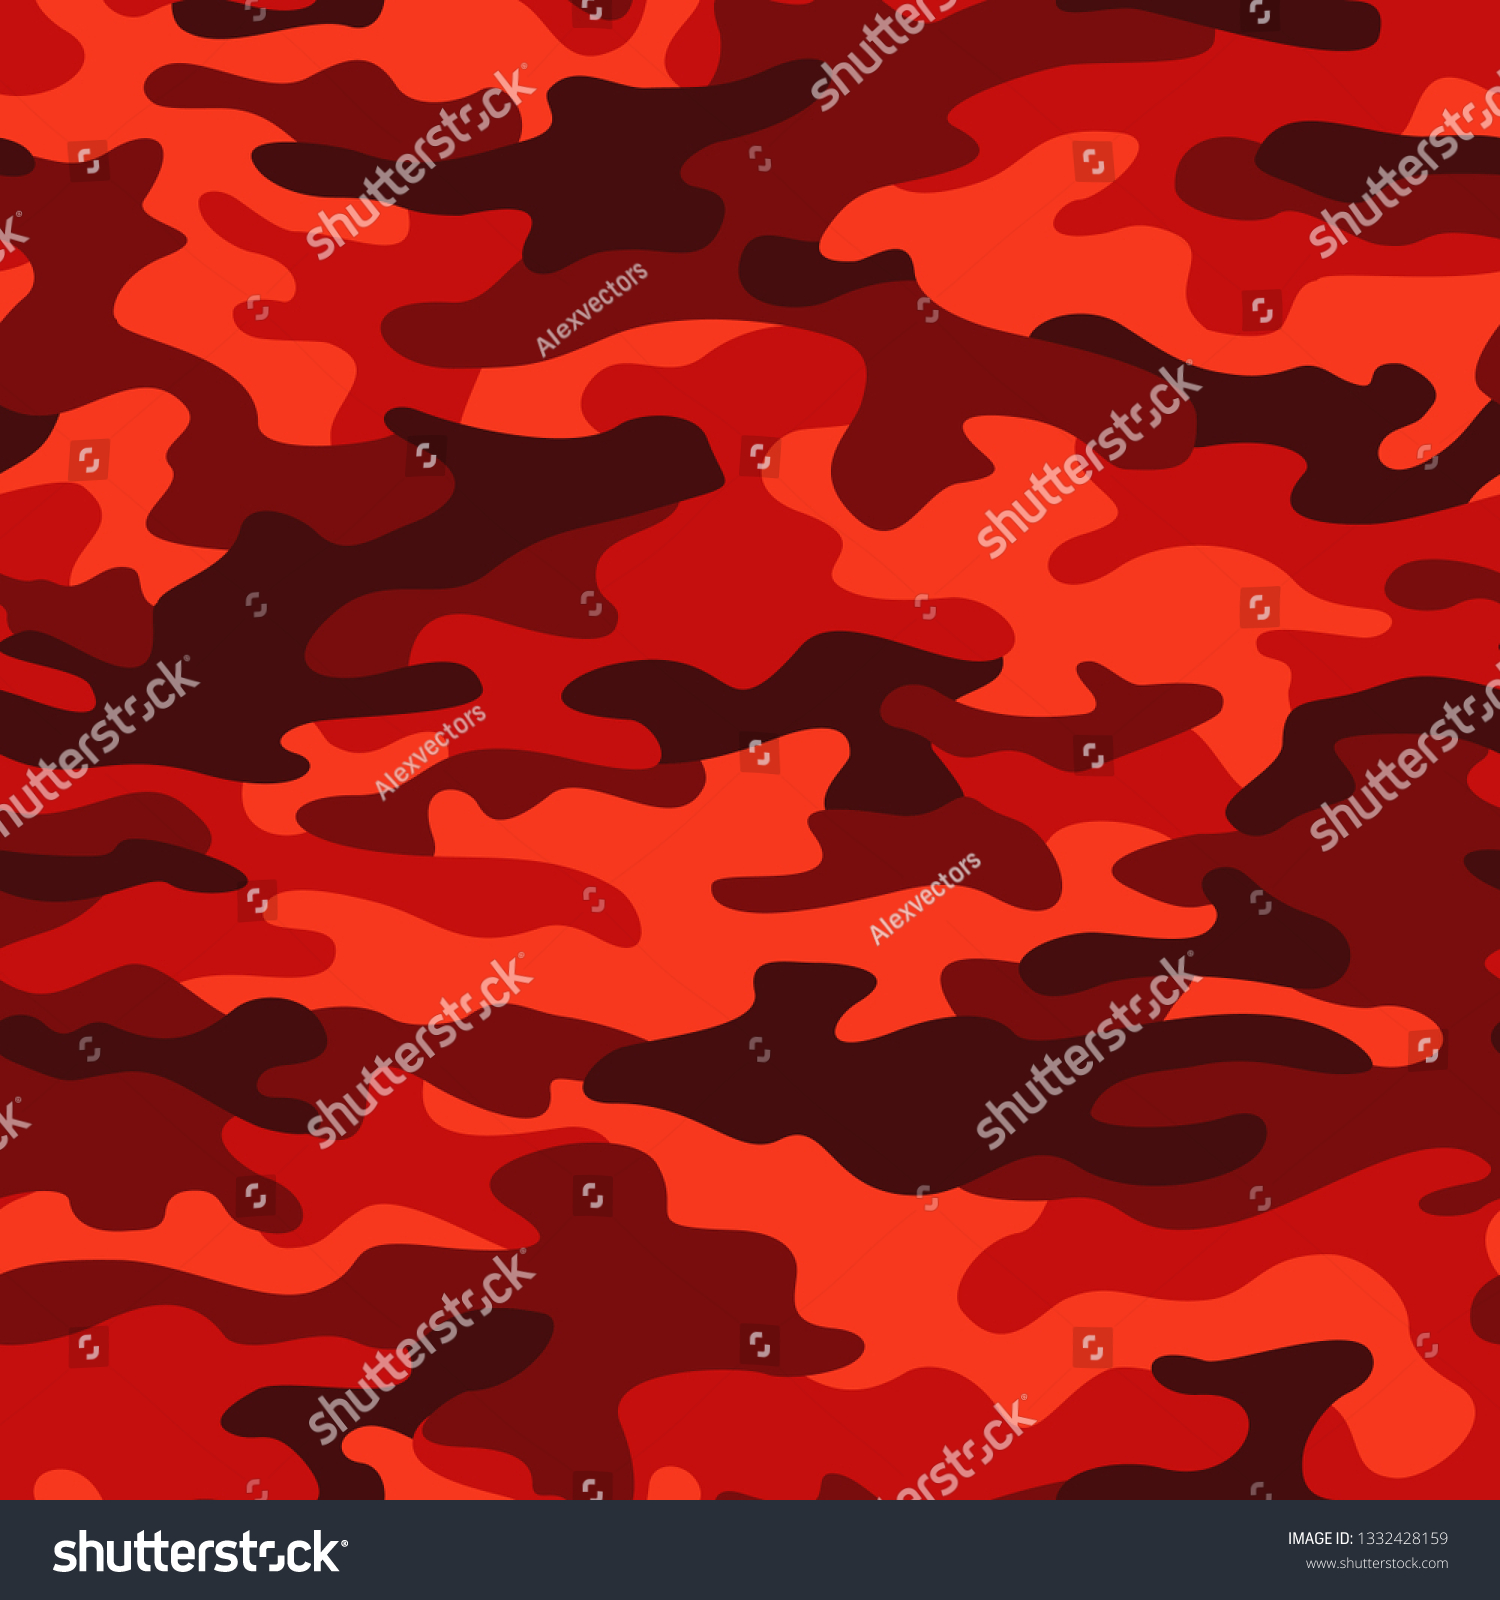 Camouflage Texture Seamless Pattern Abstract Modern Stock Vector ...